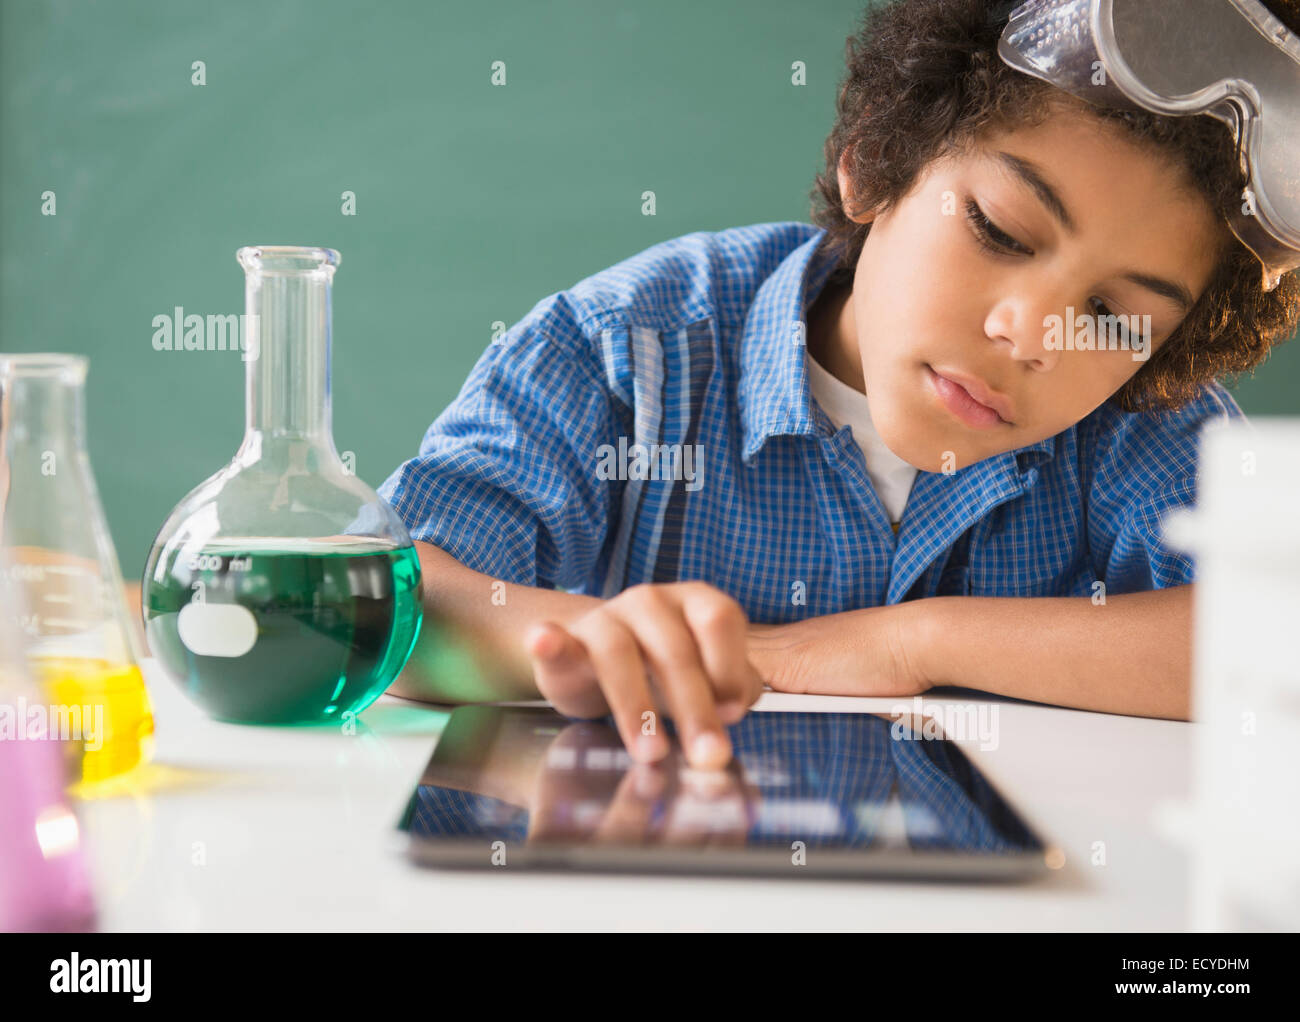 Mixed race boy using digital tablet in classroom science lab Stock Photo